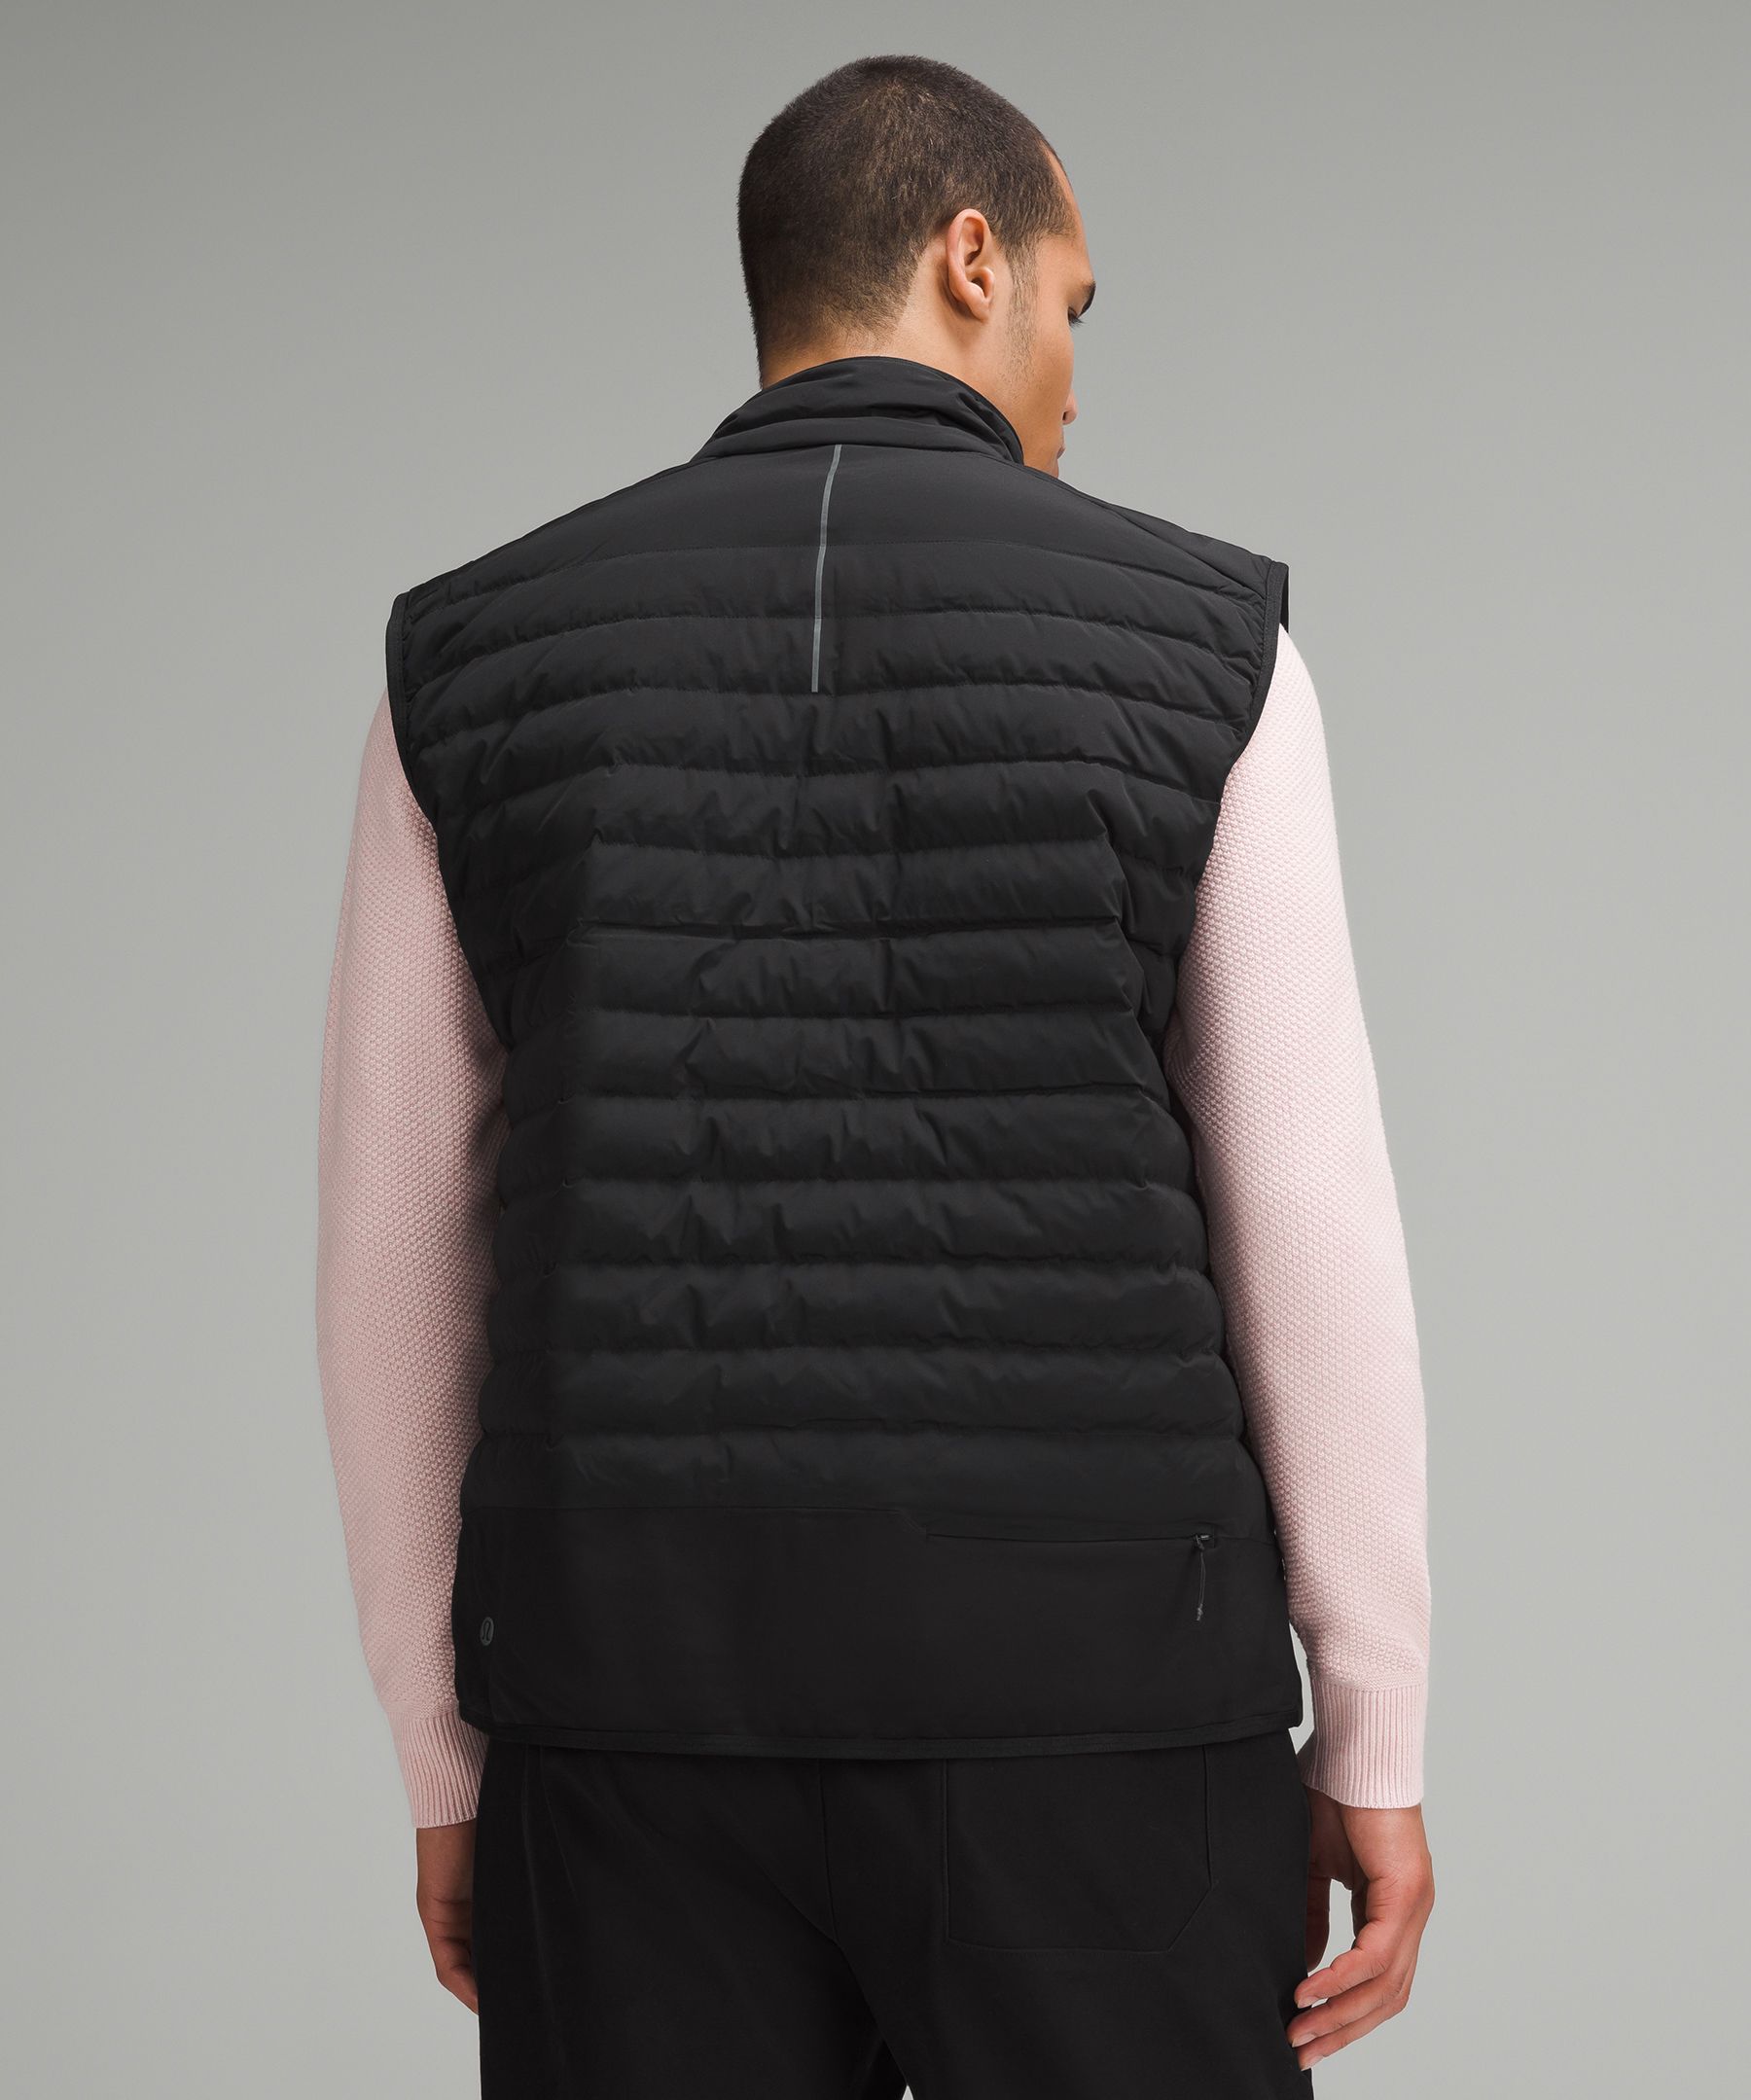 Lululemon Down for It All Vest in Black Size 0 -  Canada